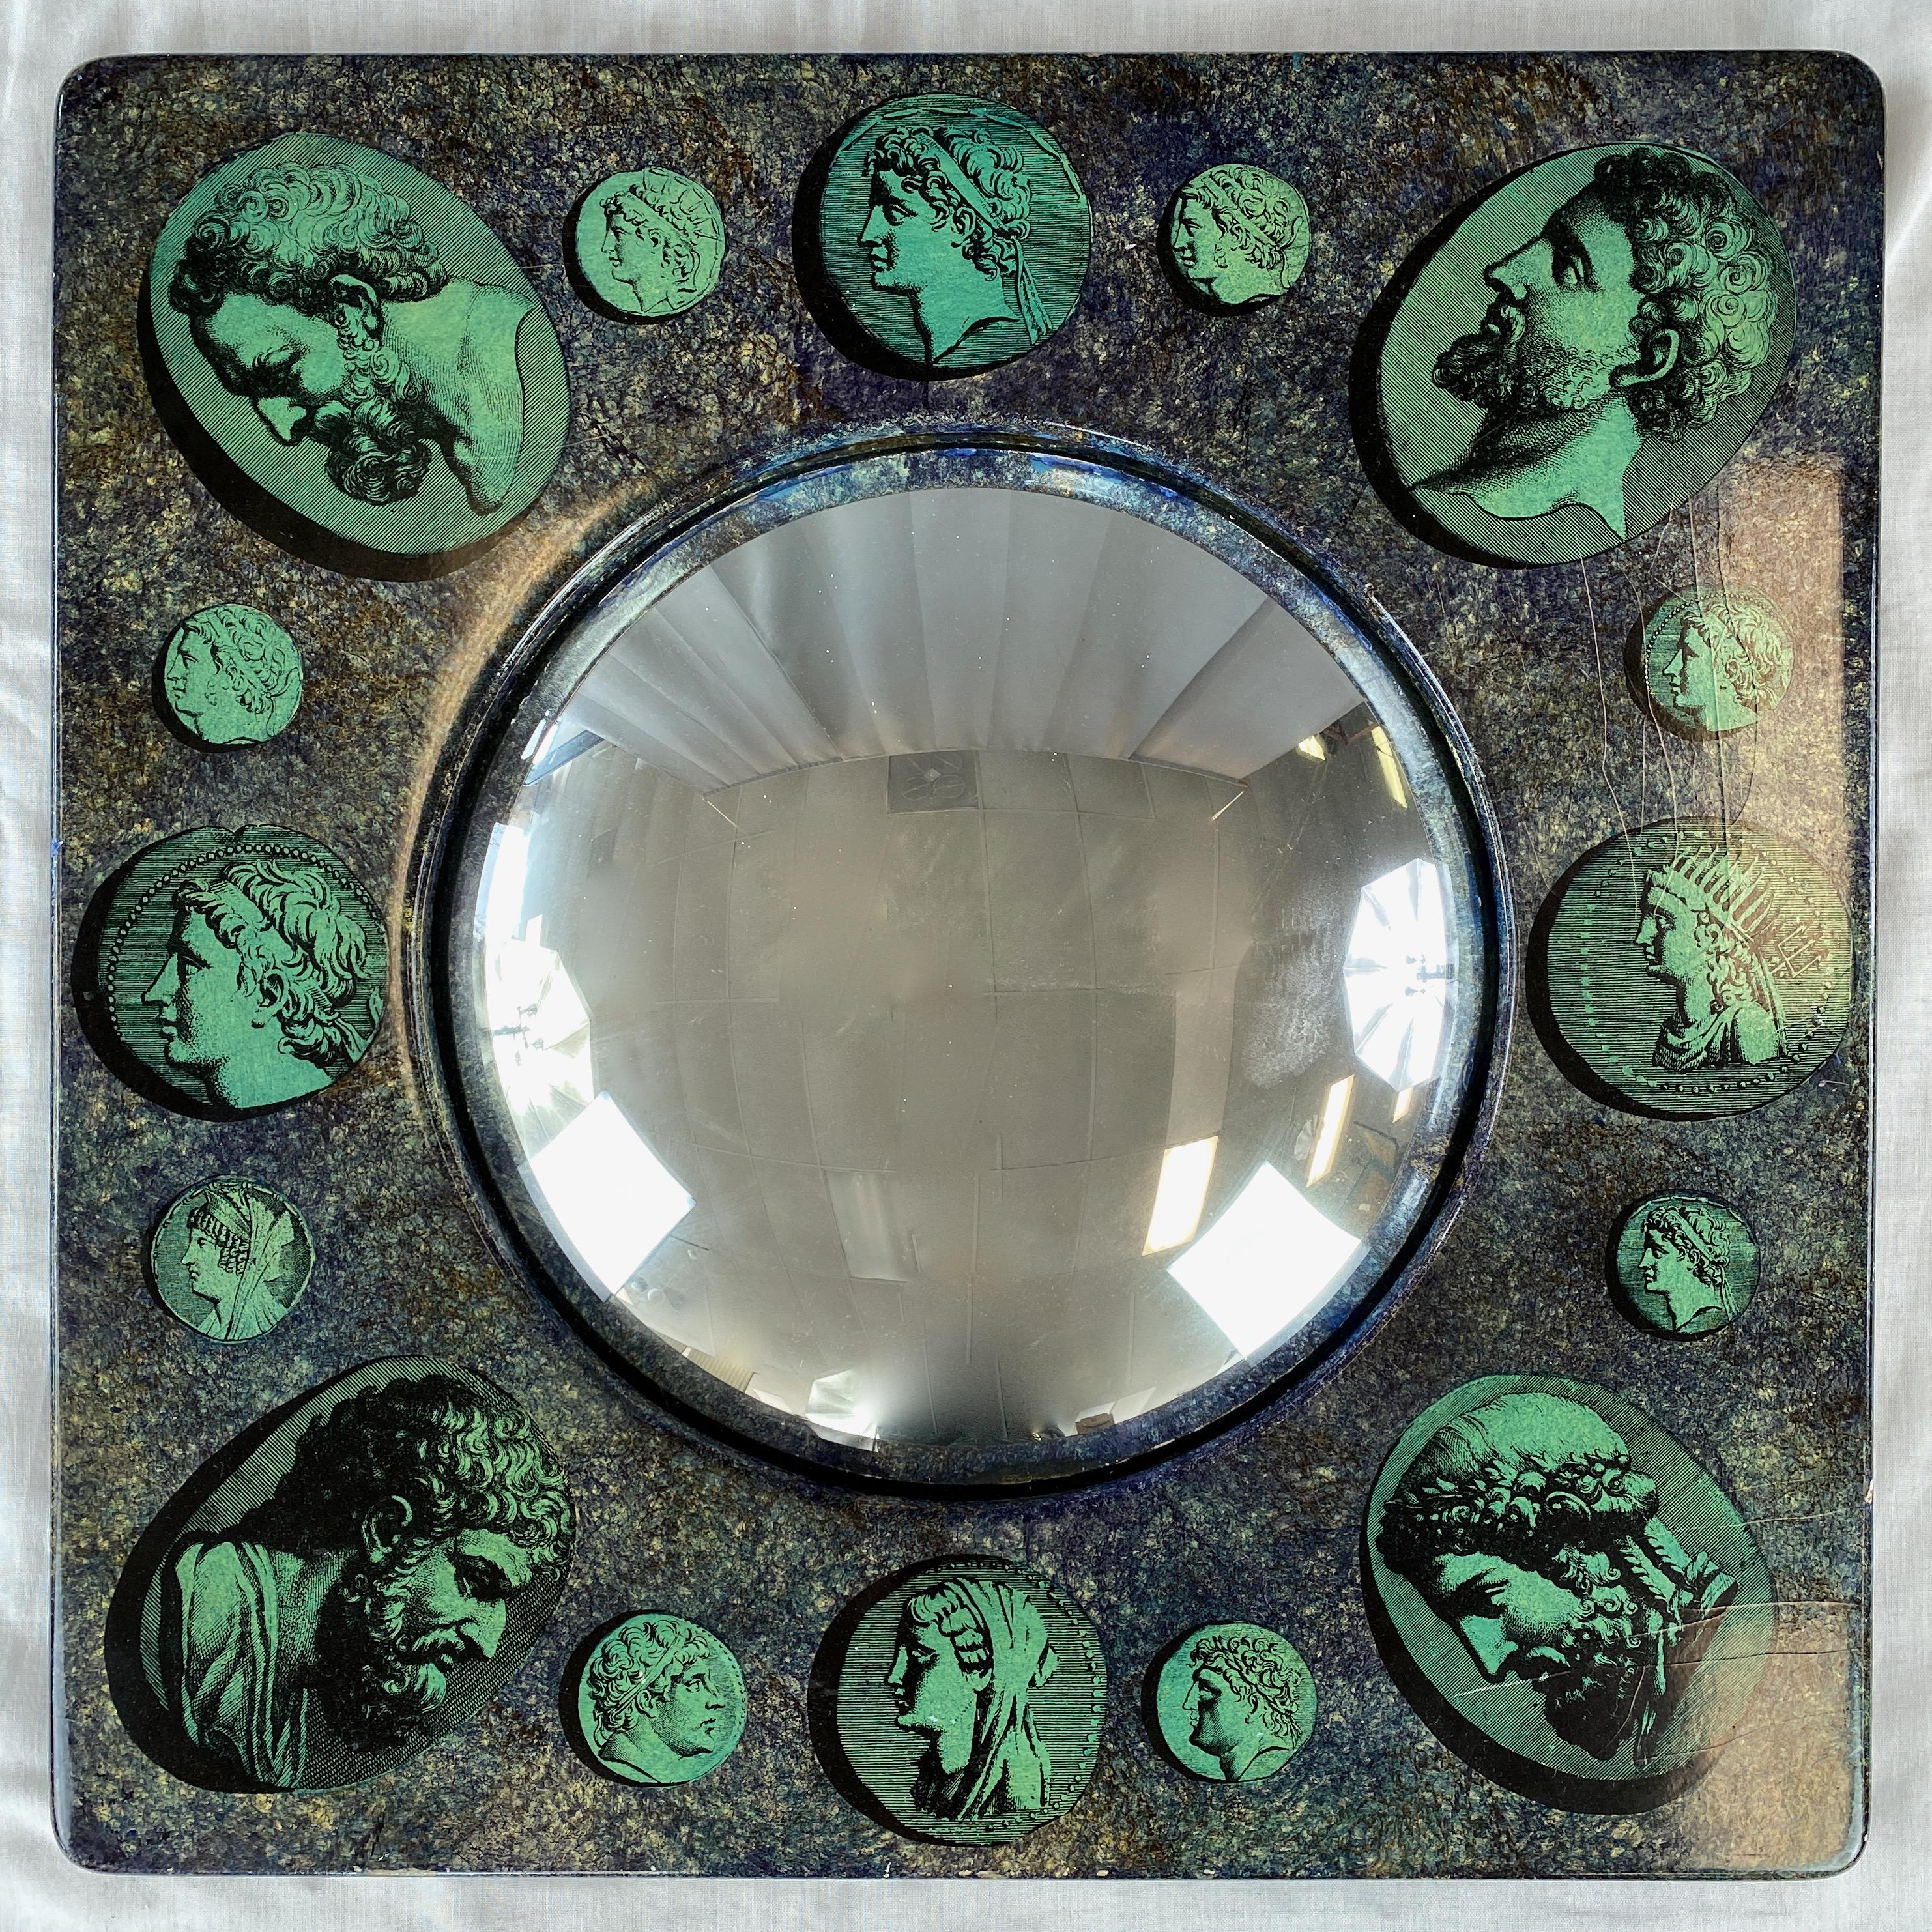 A rare and arresting 1956 square Cammei convex mirror in a seldom seen colorway by iconic Italian artist & designer Piero Fornasetti (b. 1913–1988).

Emerald green transfer-printed and applied cameos (“cammei”) of sixteen Roman gods and goddesses